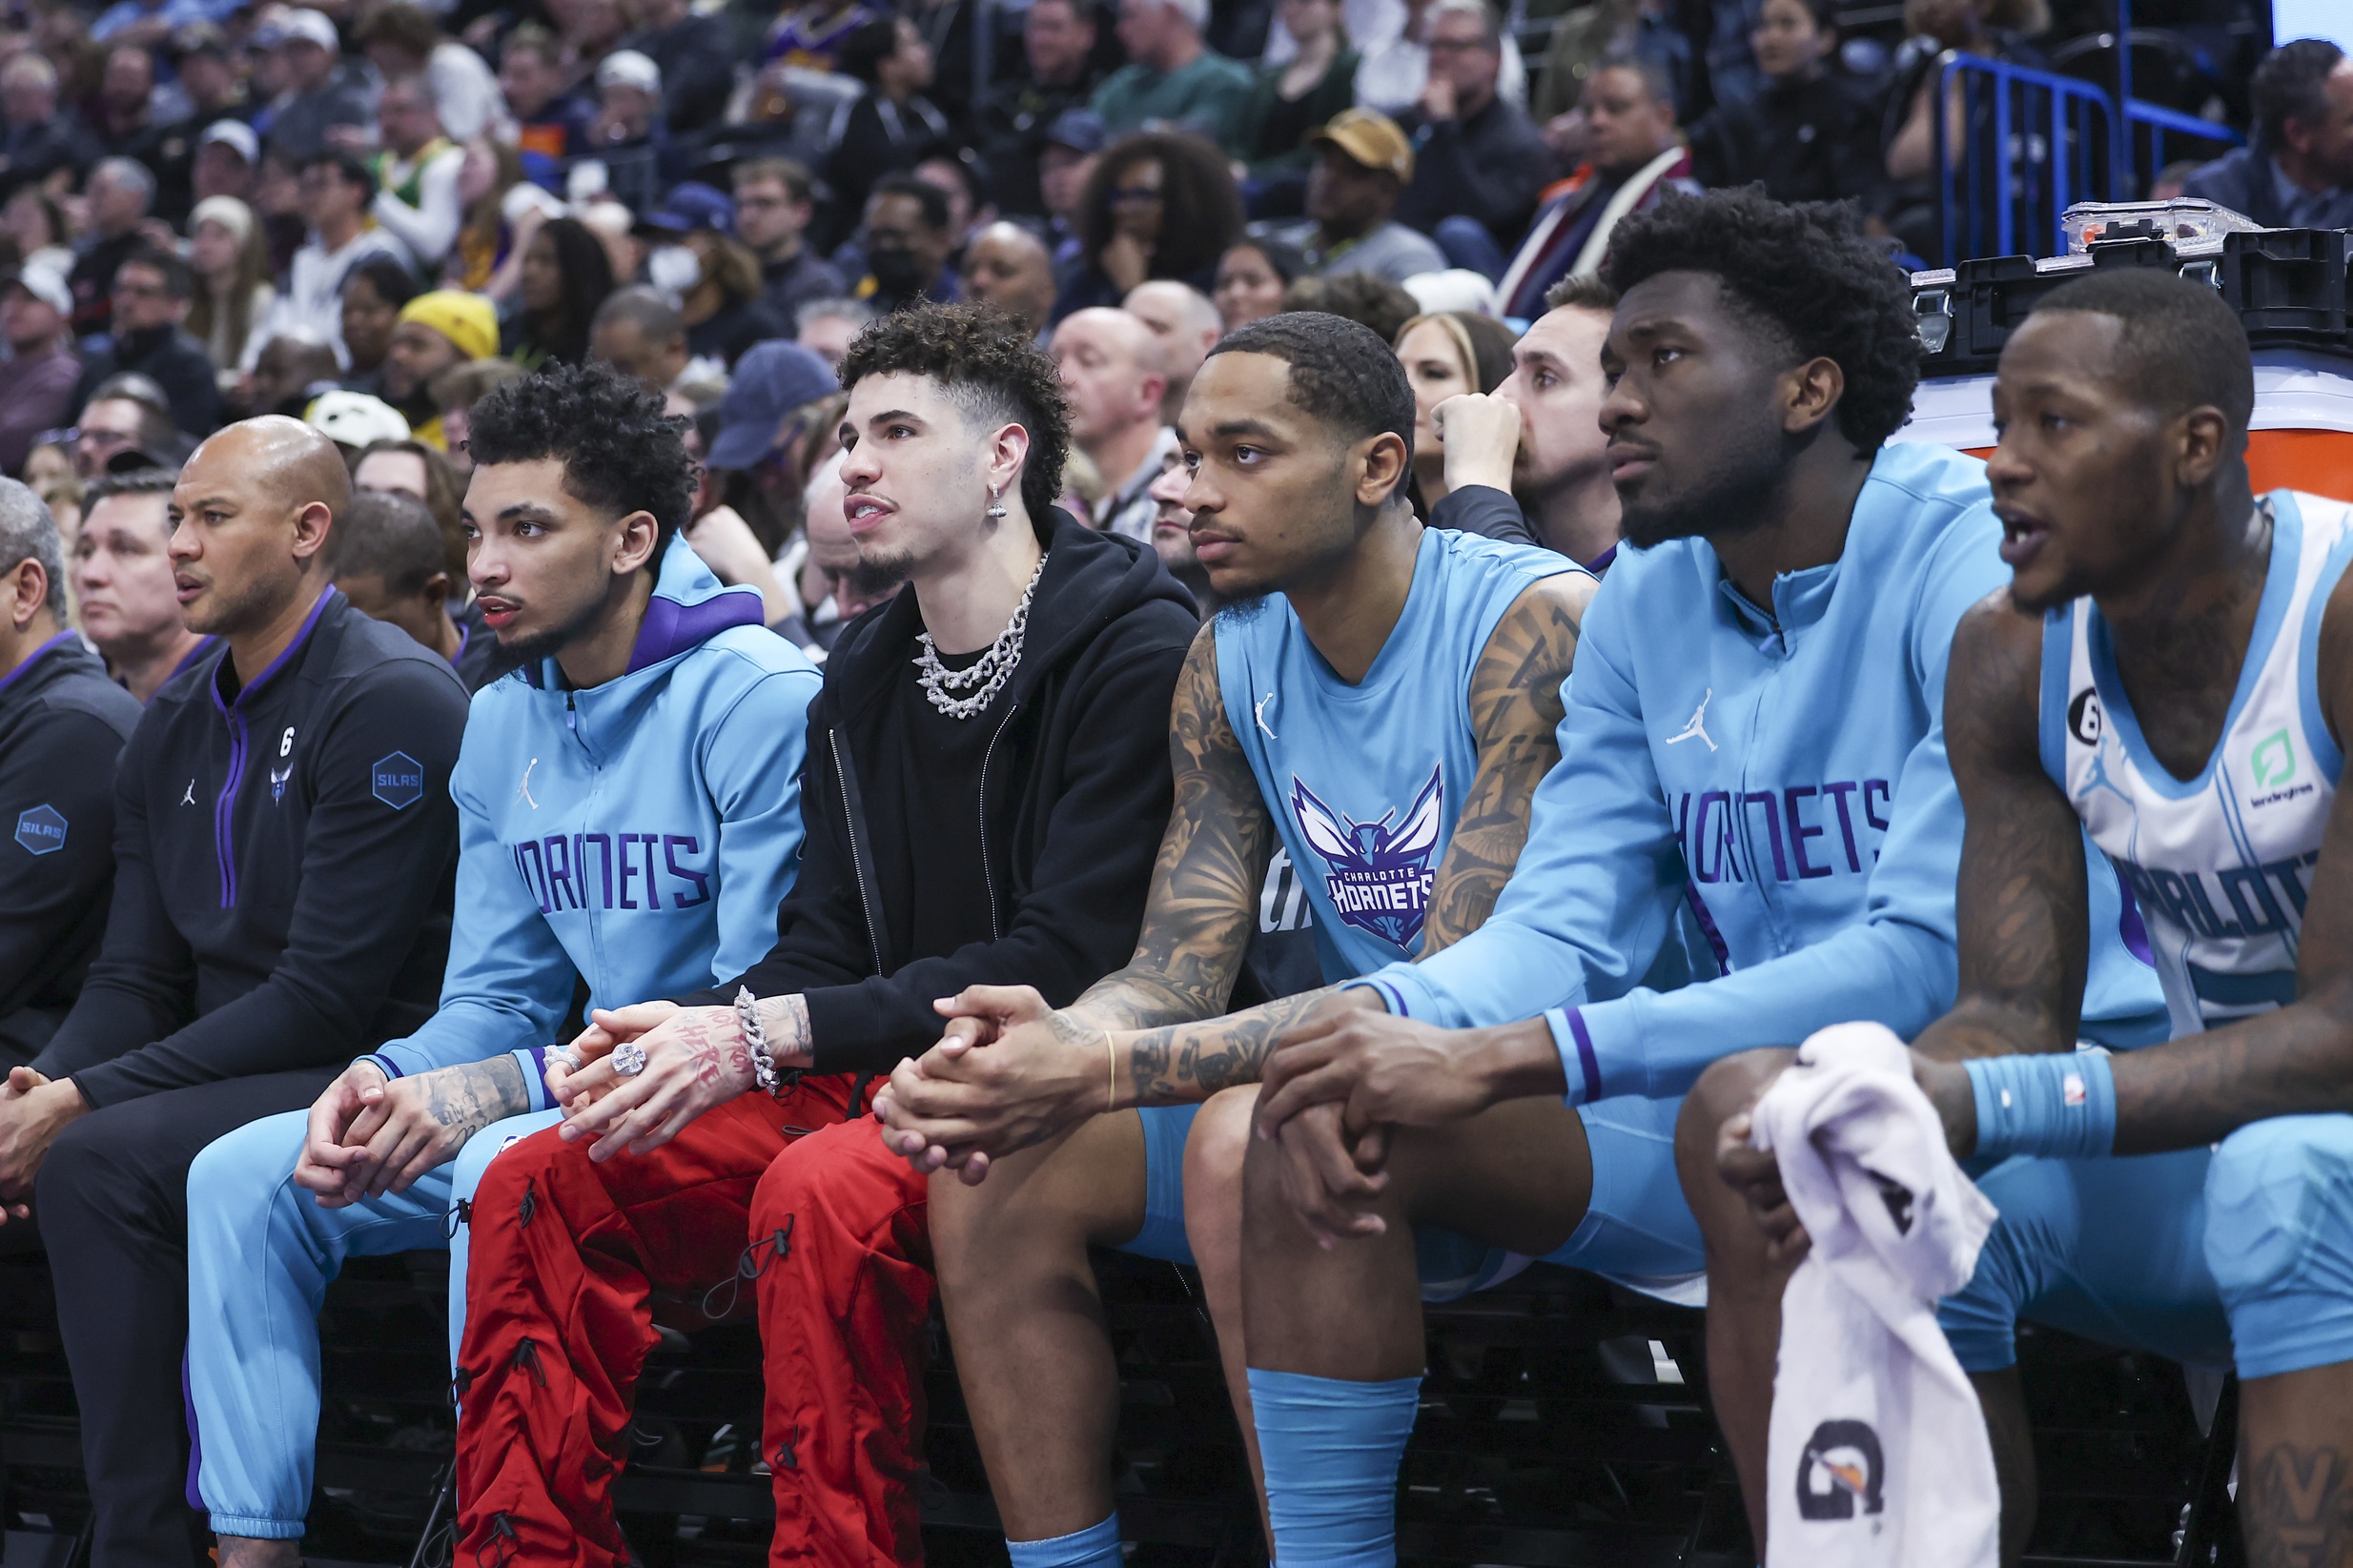 Jan 23, 2023; Salt Lake City, Utah, USA; The Charlotte Hornets bench looks on against the Utah Jazz in the second quarter at Vivint Arena. Mandatory Credit: Rob Gray-USA TODAY Sports